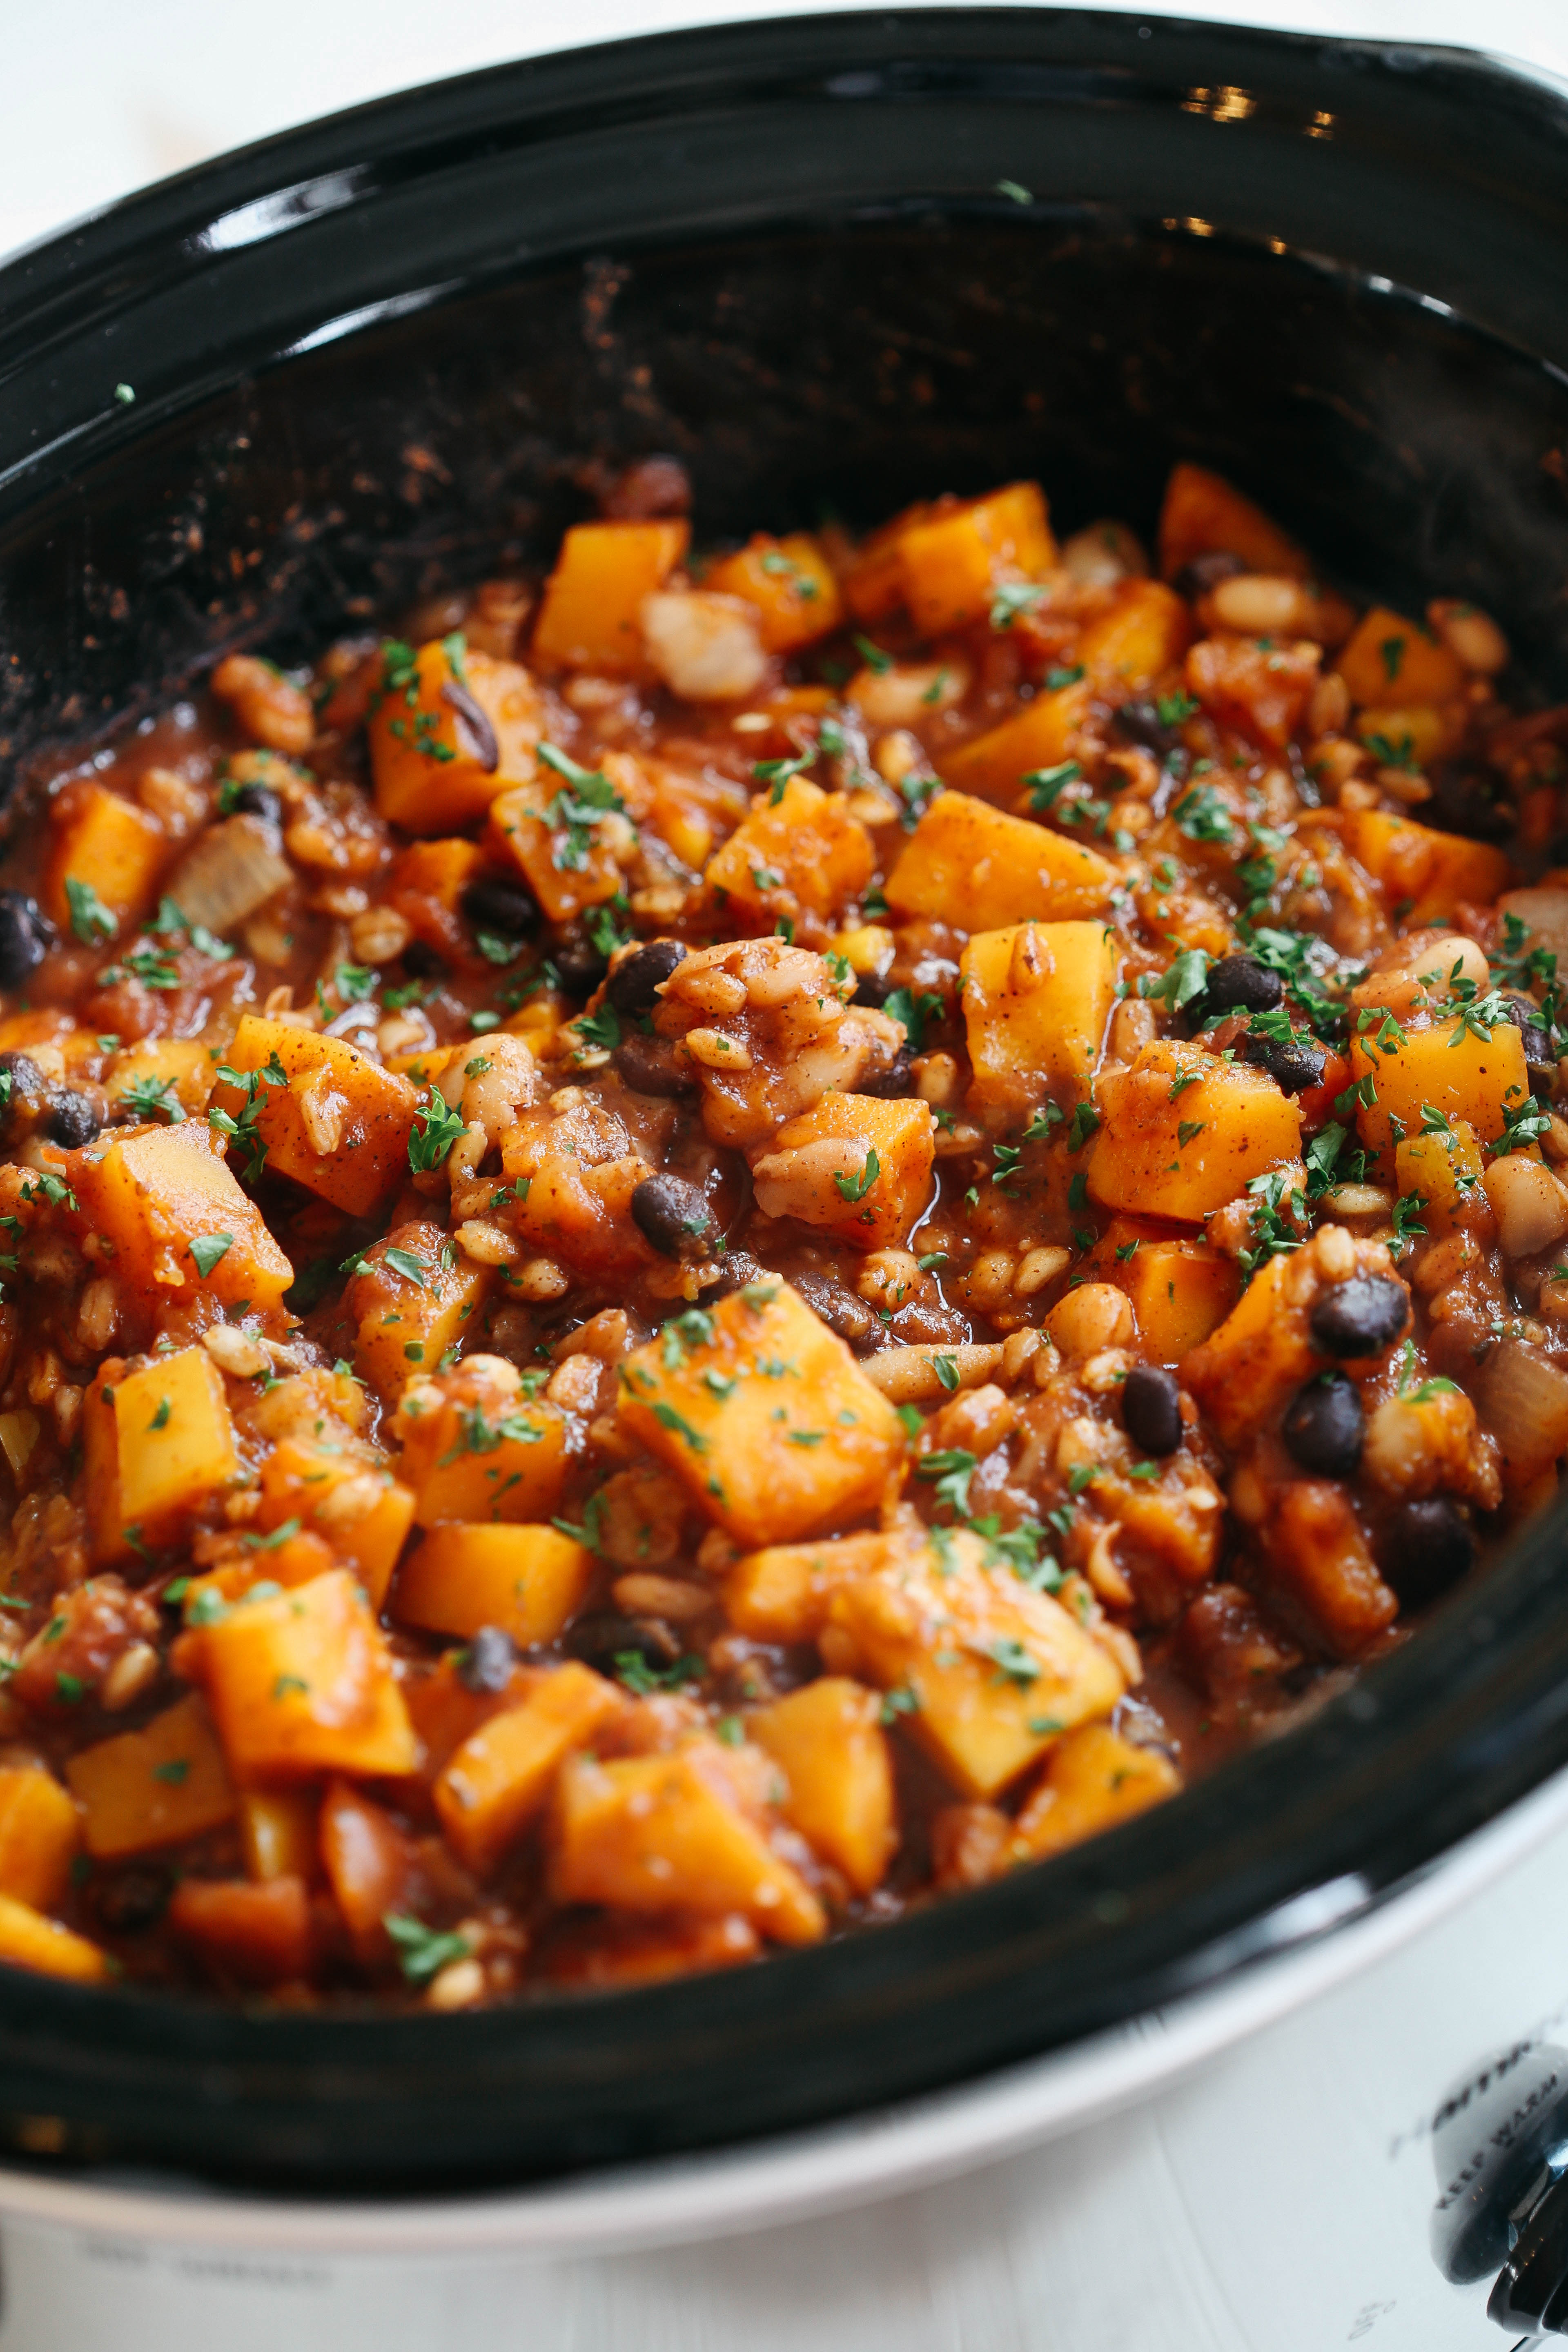 This Slow Cooker Butternut Squash and Farro Chili is healthy, hearty and the perfect delicious recipe to warm you up in the colder months!